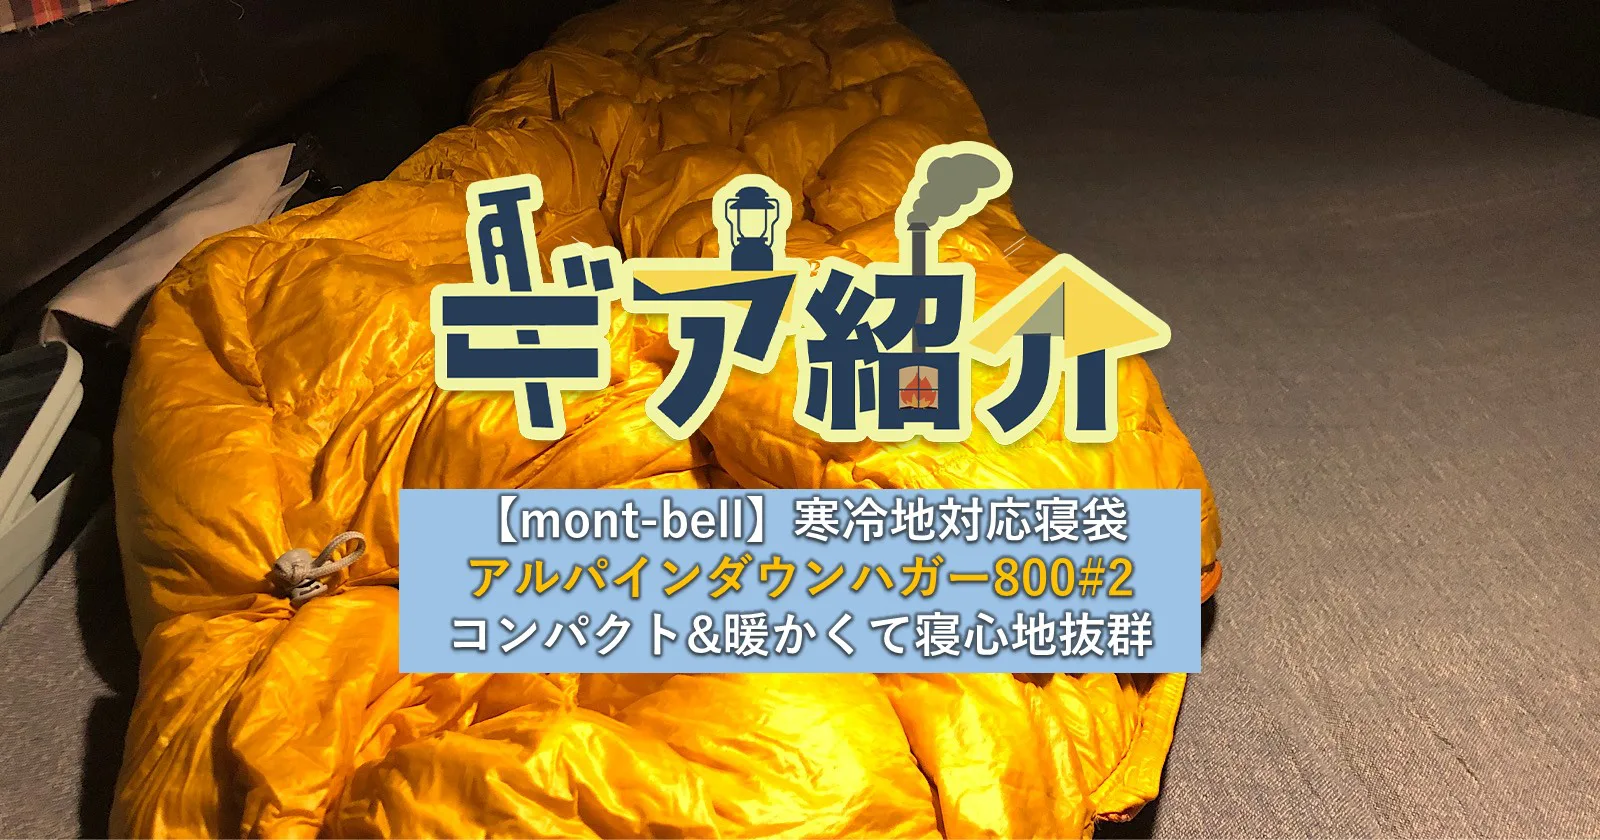 mont-bell】寒冷地対応寝袋アルパインダウンハガー800#2は コンパクト ...